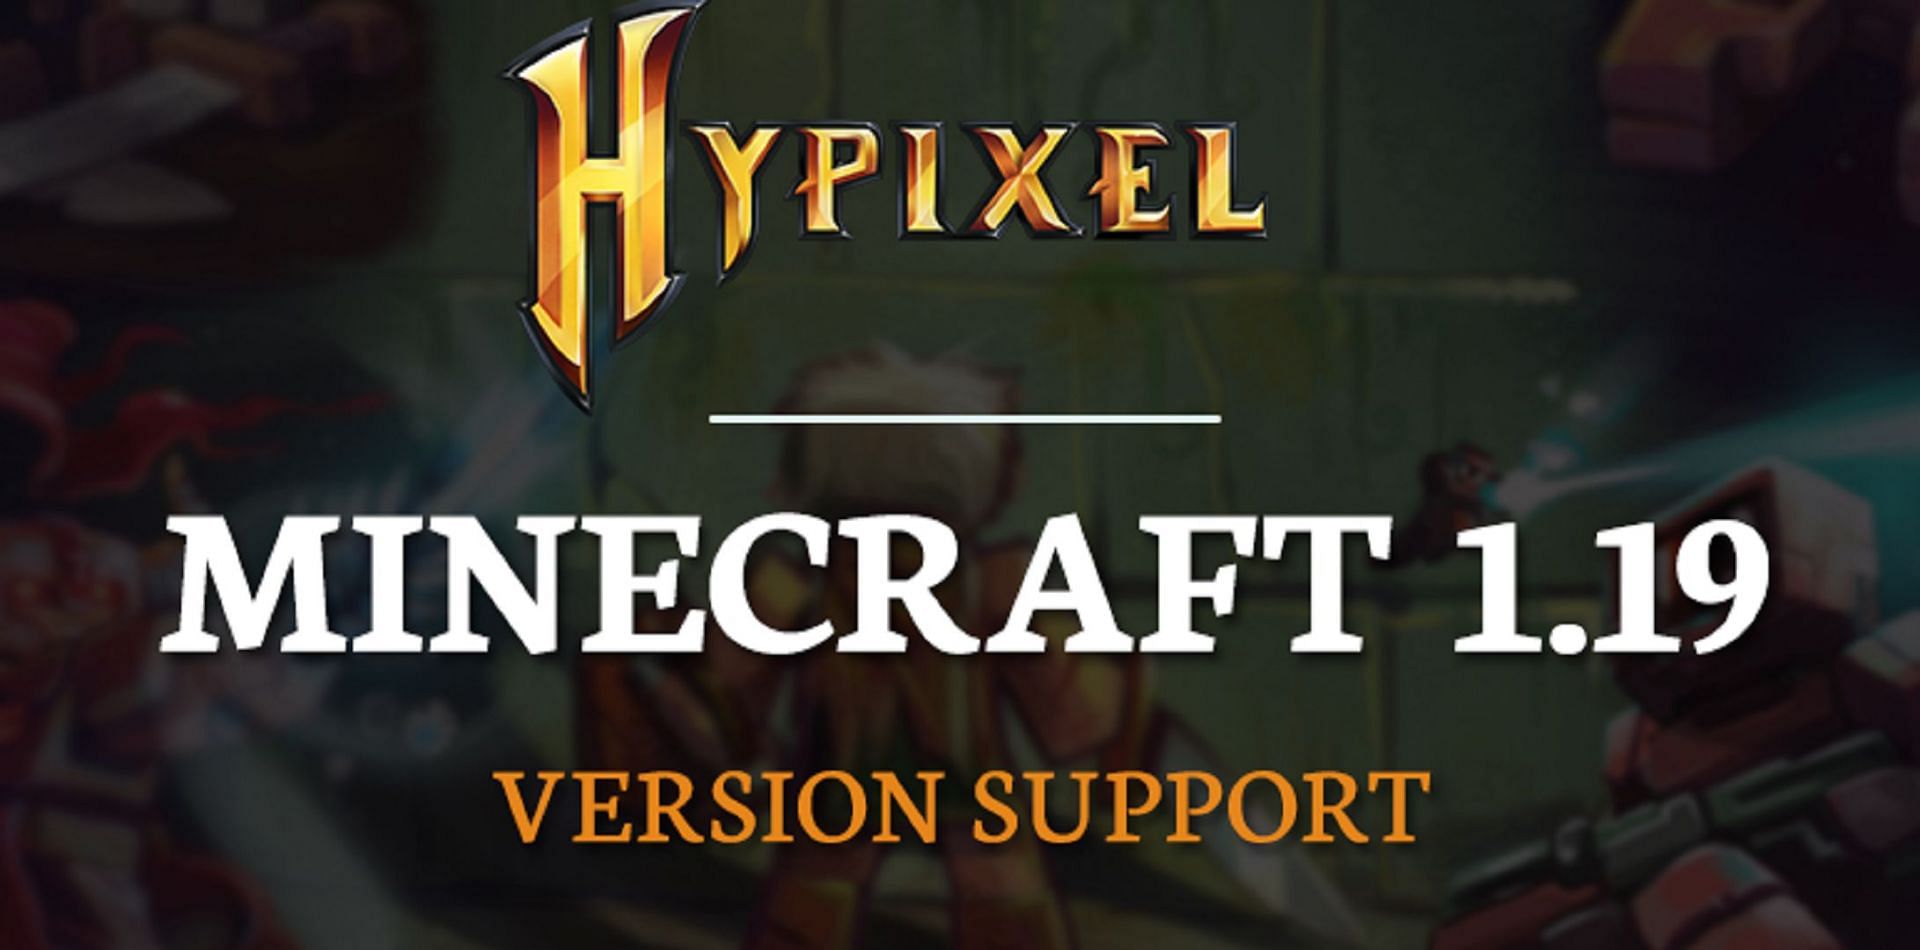 Hypixel remains one of the most popular servers ever (Image via Hypixel)